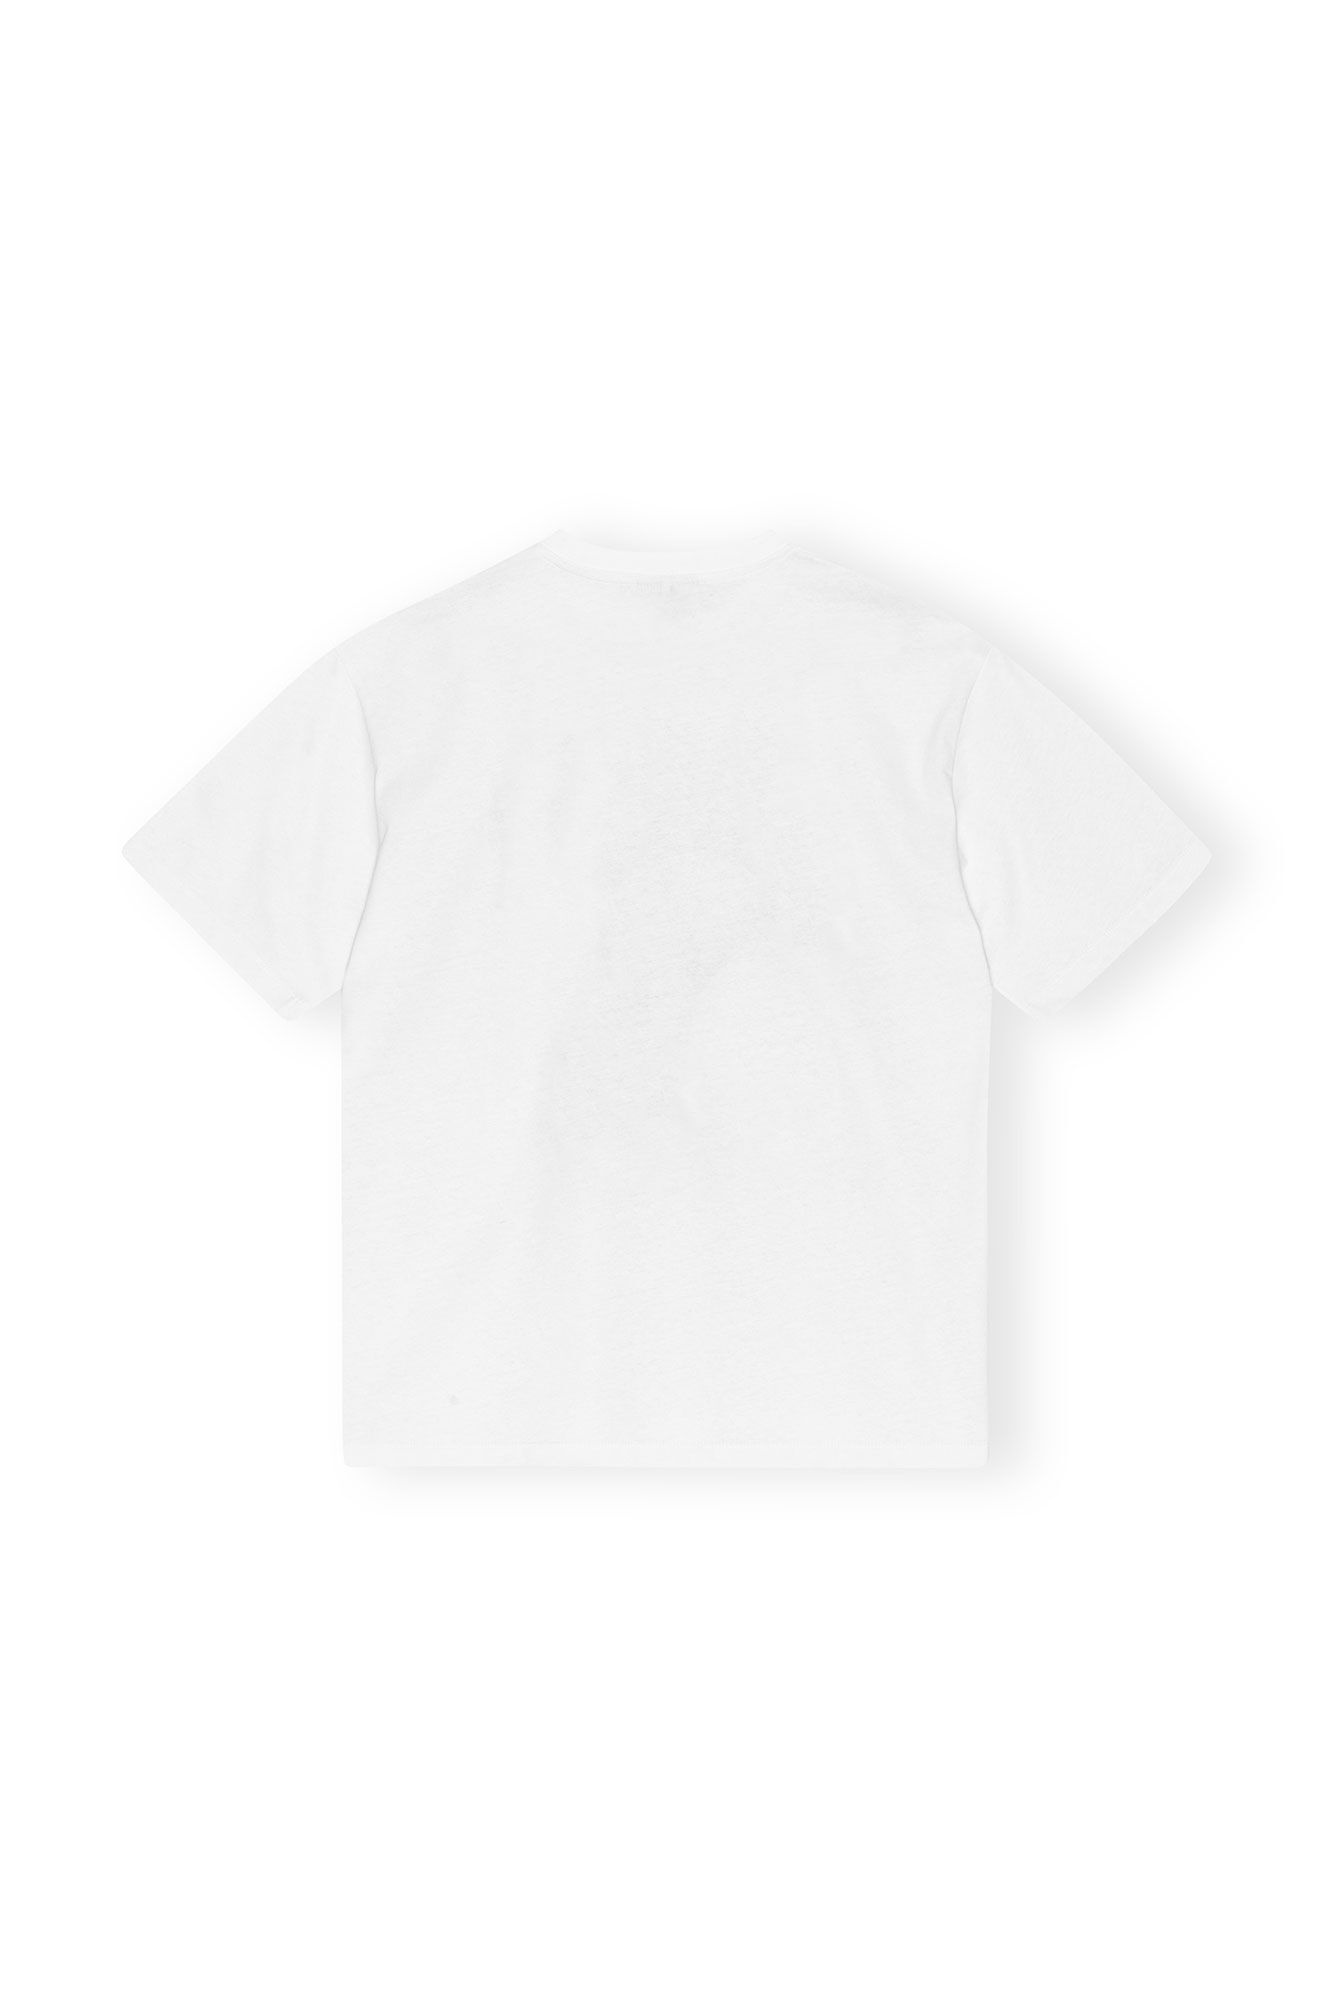 WHITE FUTURE RELAXED COCKTAIL T-SHIRT - 2